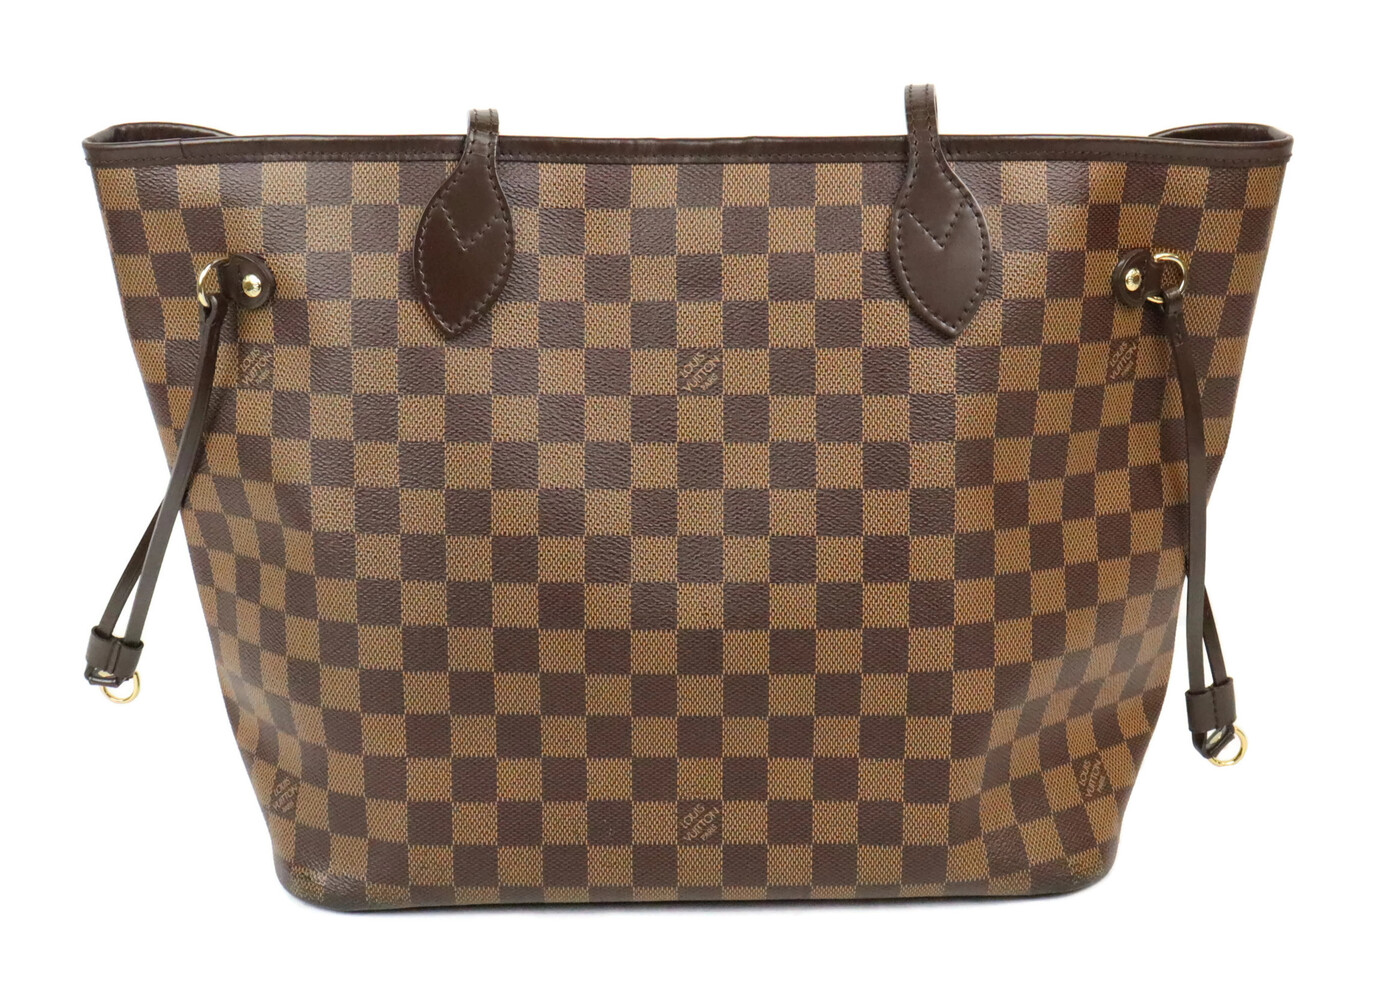 Authentic Louis Vuitton Damier Ebene Luxury Leather Neverfull MM Hand Bag 